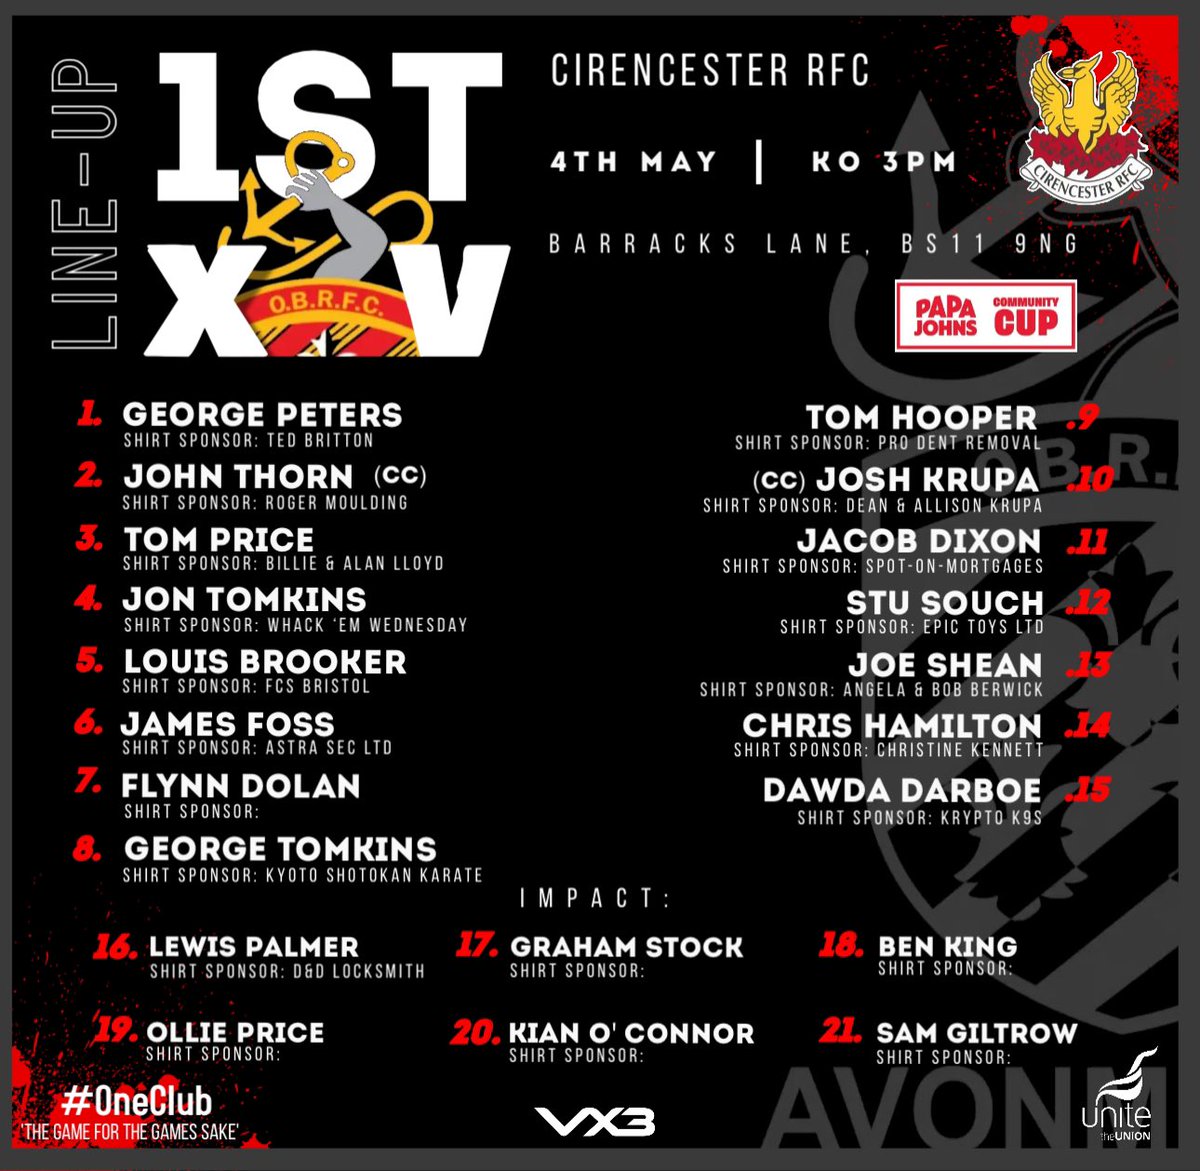 SQUAD ANNOUNCEMENT⤵️ Our 1st XV Squad to face @CirencesterRFC in the Papa Johns Counties 2 Shield Semi-Final. ⚫️🔴⚫️ @GRFUrugby @swsportsnews #PapaJohnsCommunityCup